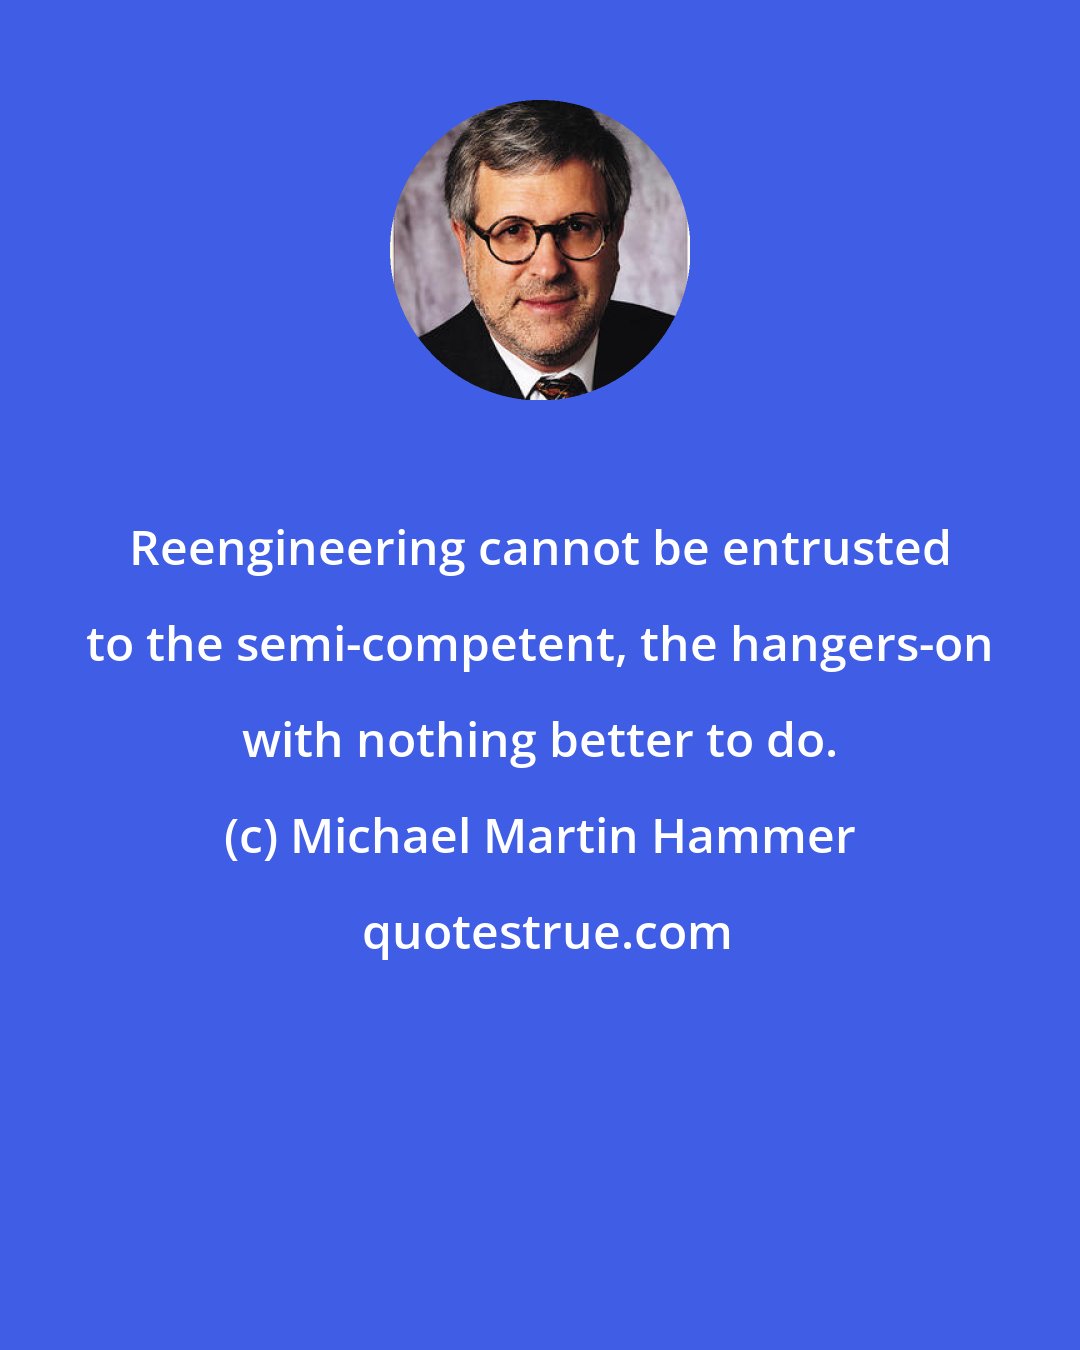 Michael Martin Hammer: Reengineering cannot be entrusted to the semi-competent, the hangers-on with nothing better to do.